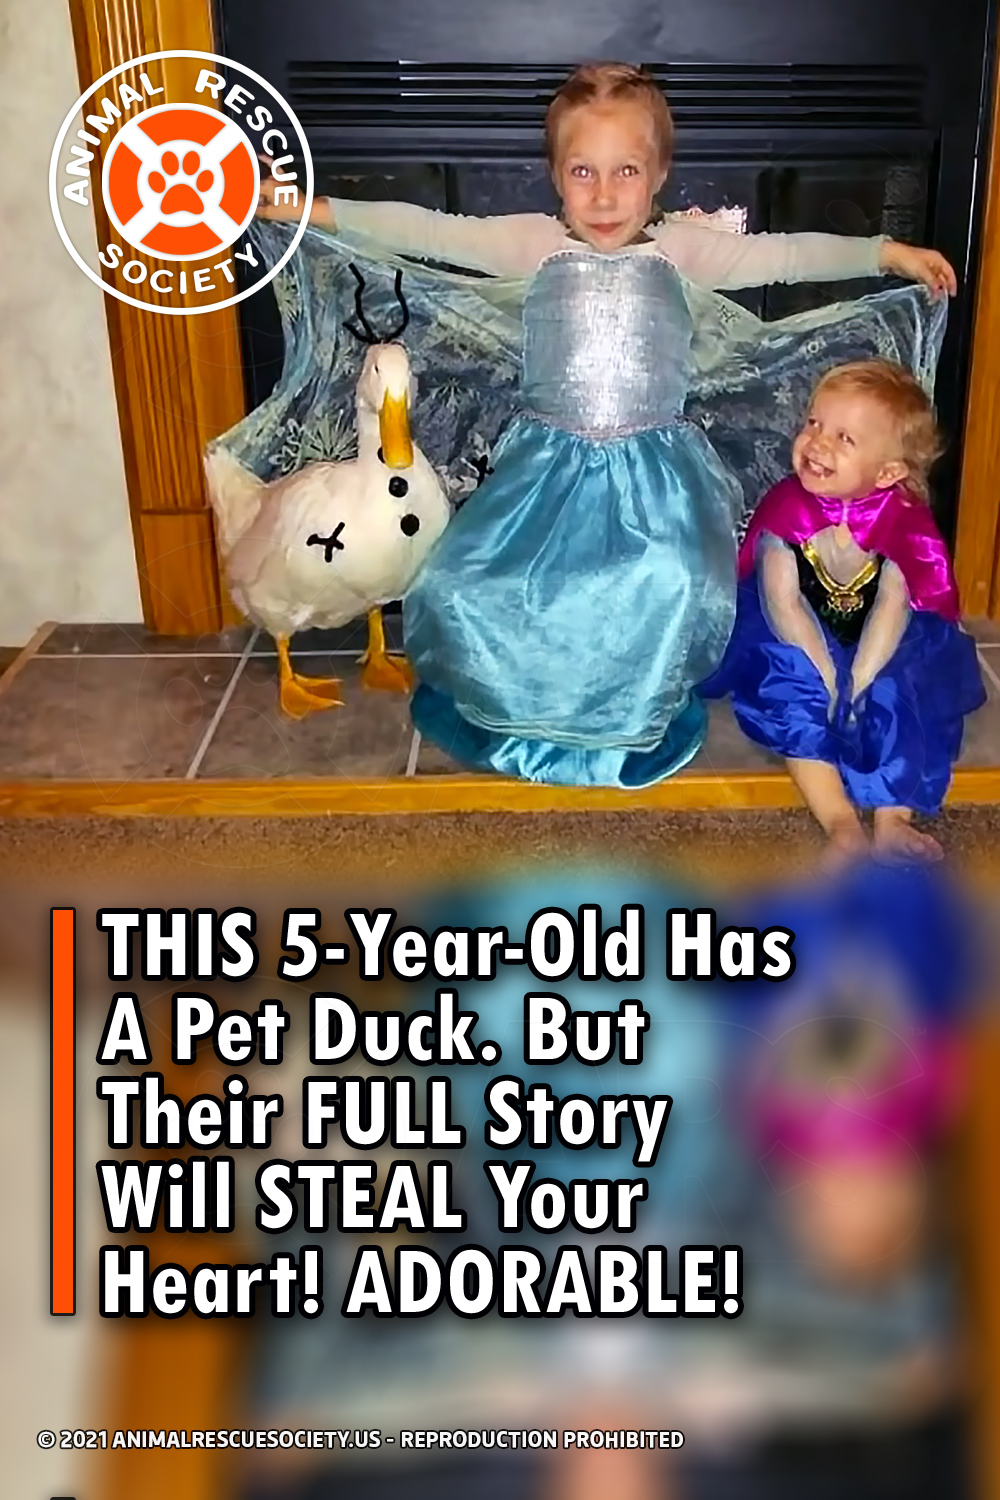 THIS 5-Year-Old Has A Pet Duck. But Their FULL Story Will STEAL Your Heart! ADORABLE!